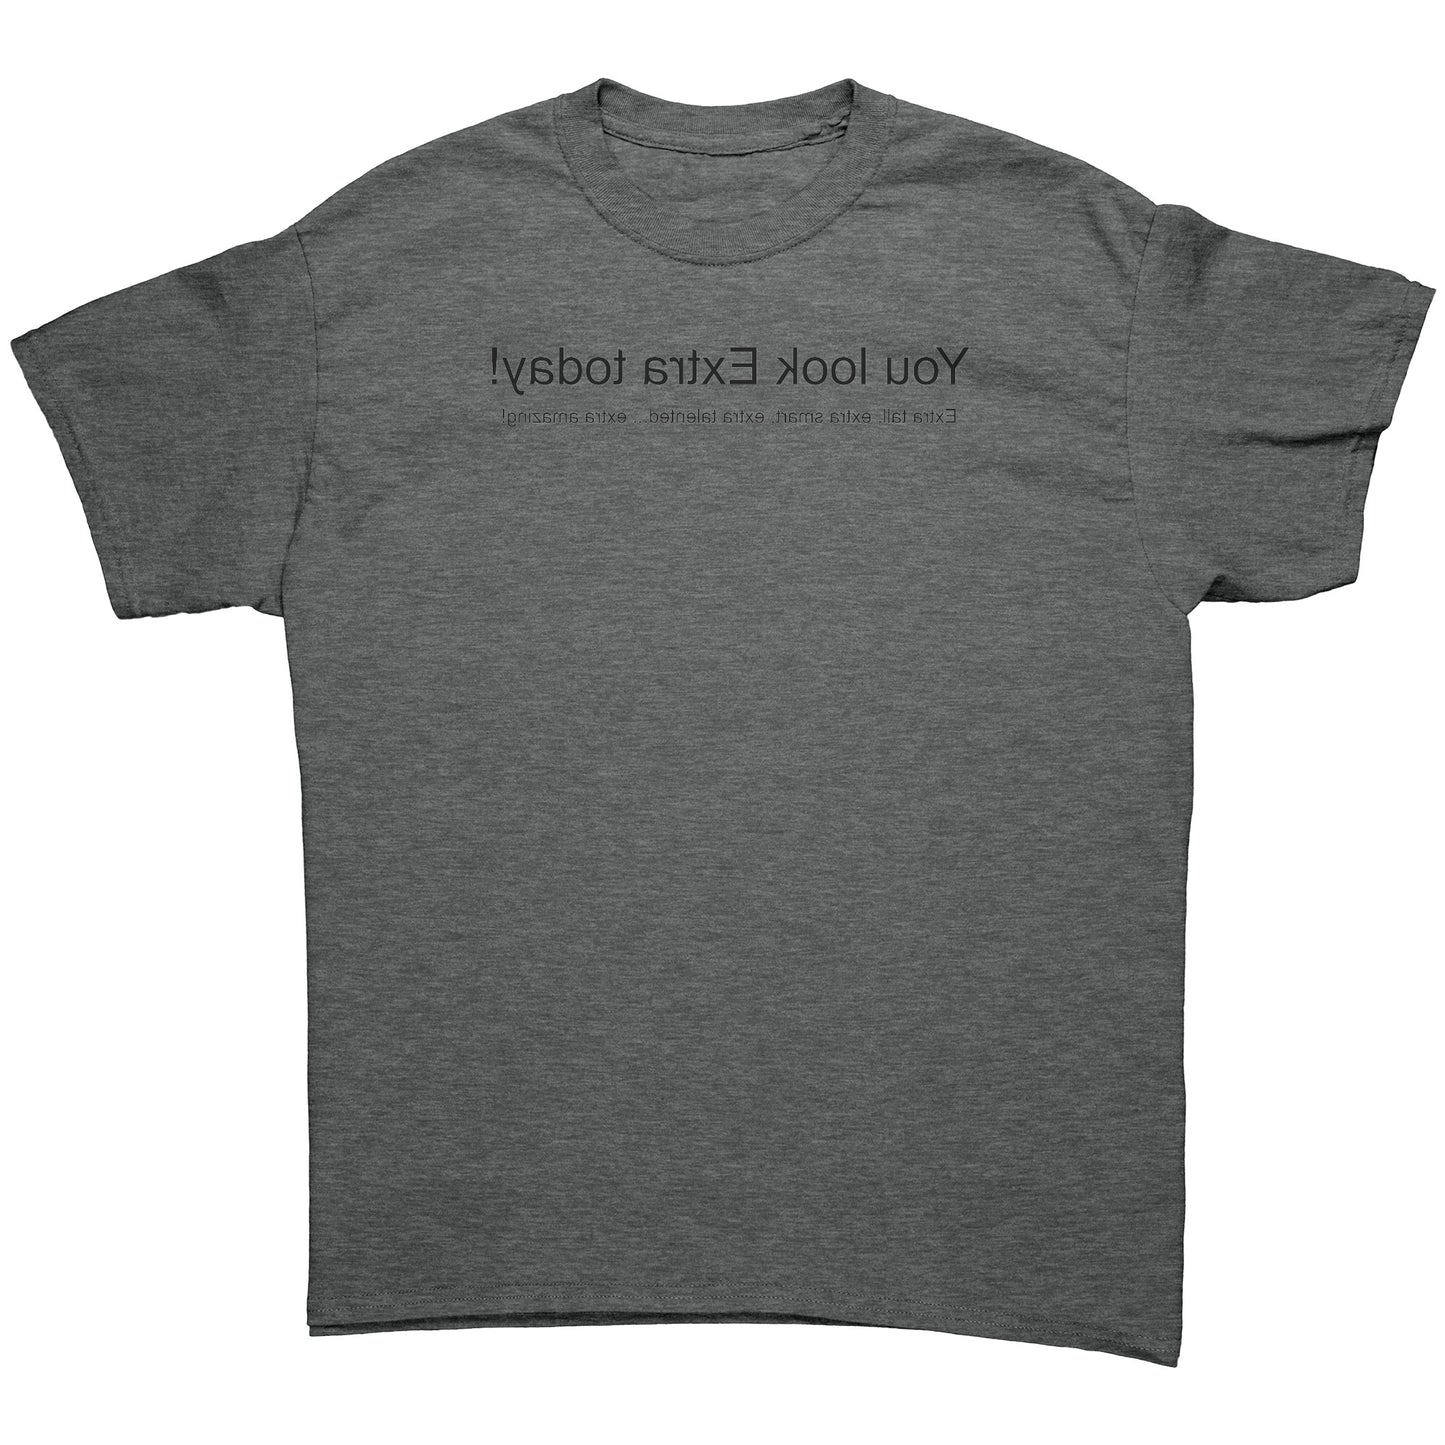 Extra Mirrored Men's Shirt With Black Lettering